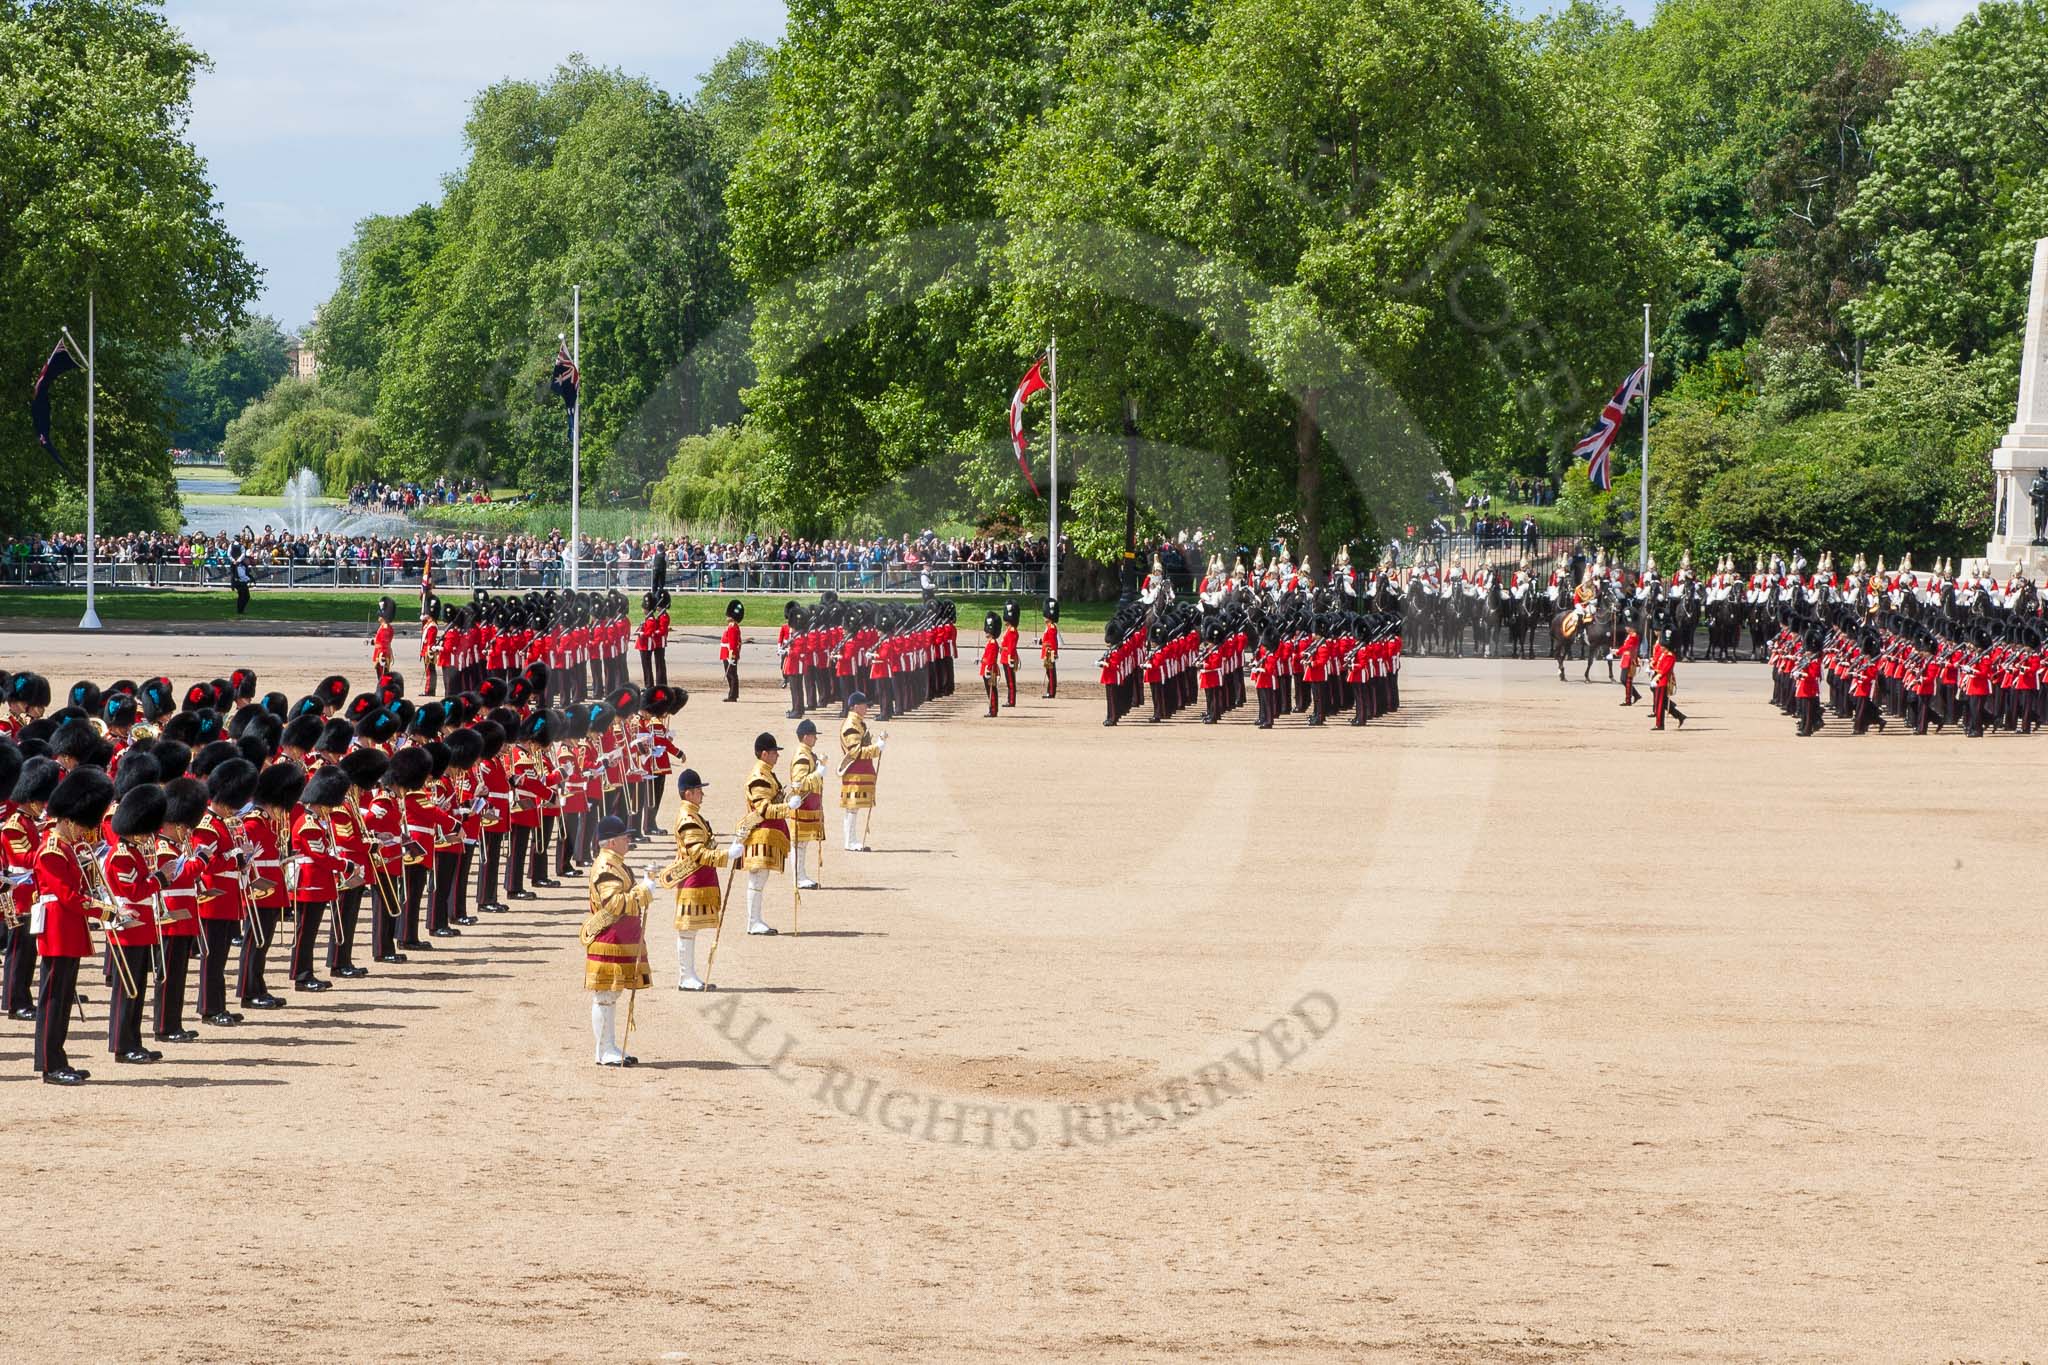 The Colonel's Review 2013: The six guards divisions have changed direction. Behind them, the Household Cavalry is leaving their position to march off..
Horse Guards Parade, Westminster,
London SW1,

United Kingdom,
on 08 June 2013 at 12:04, image #814